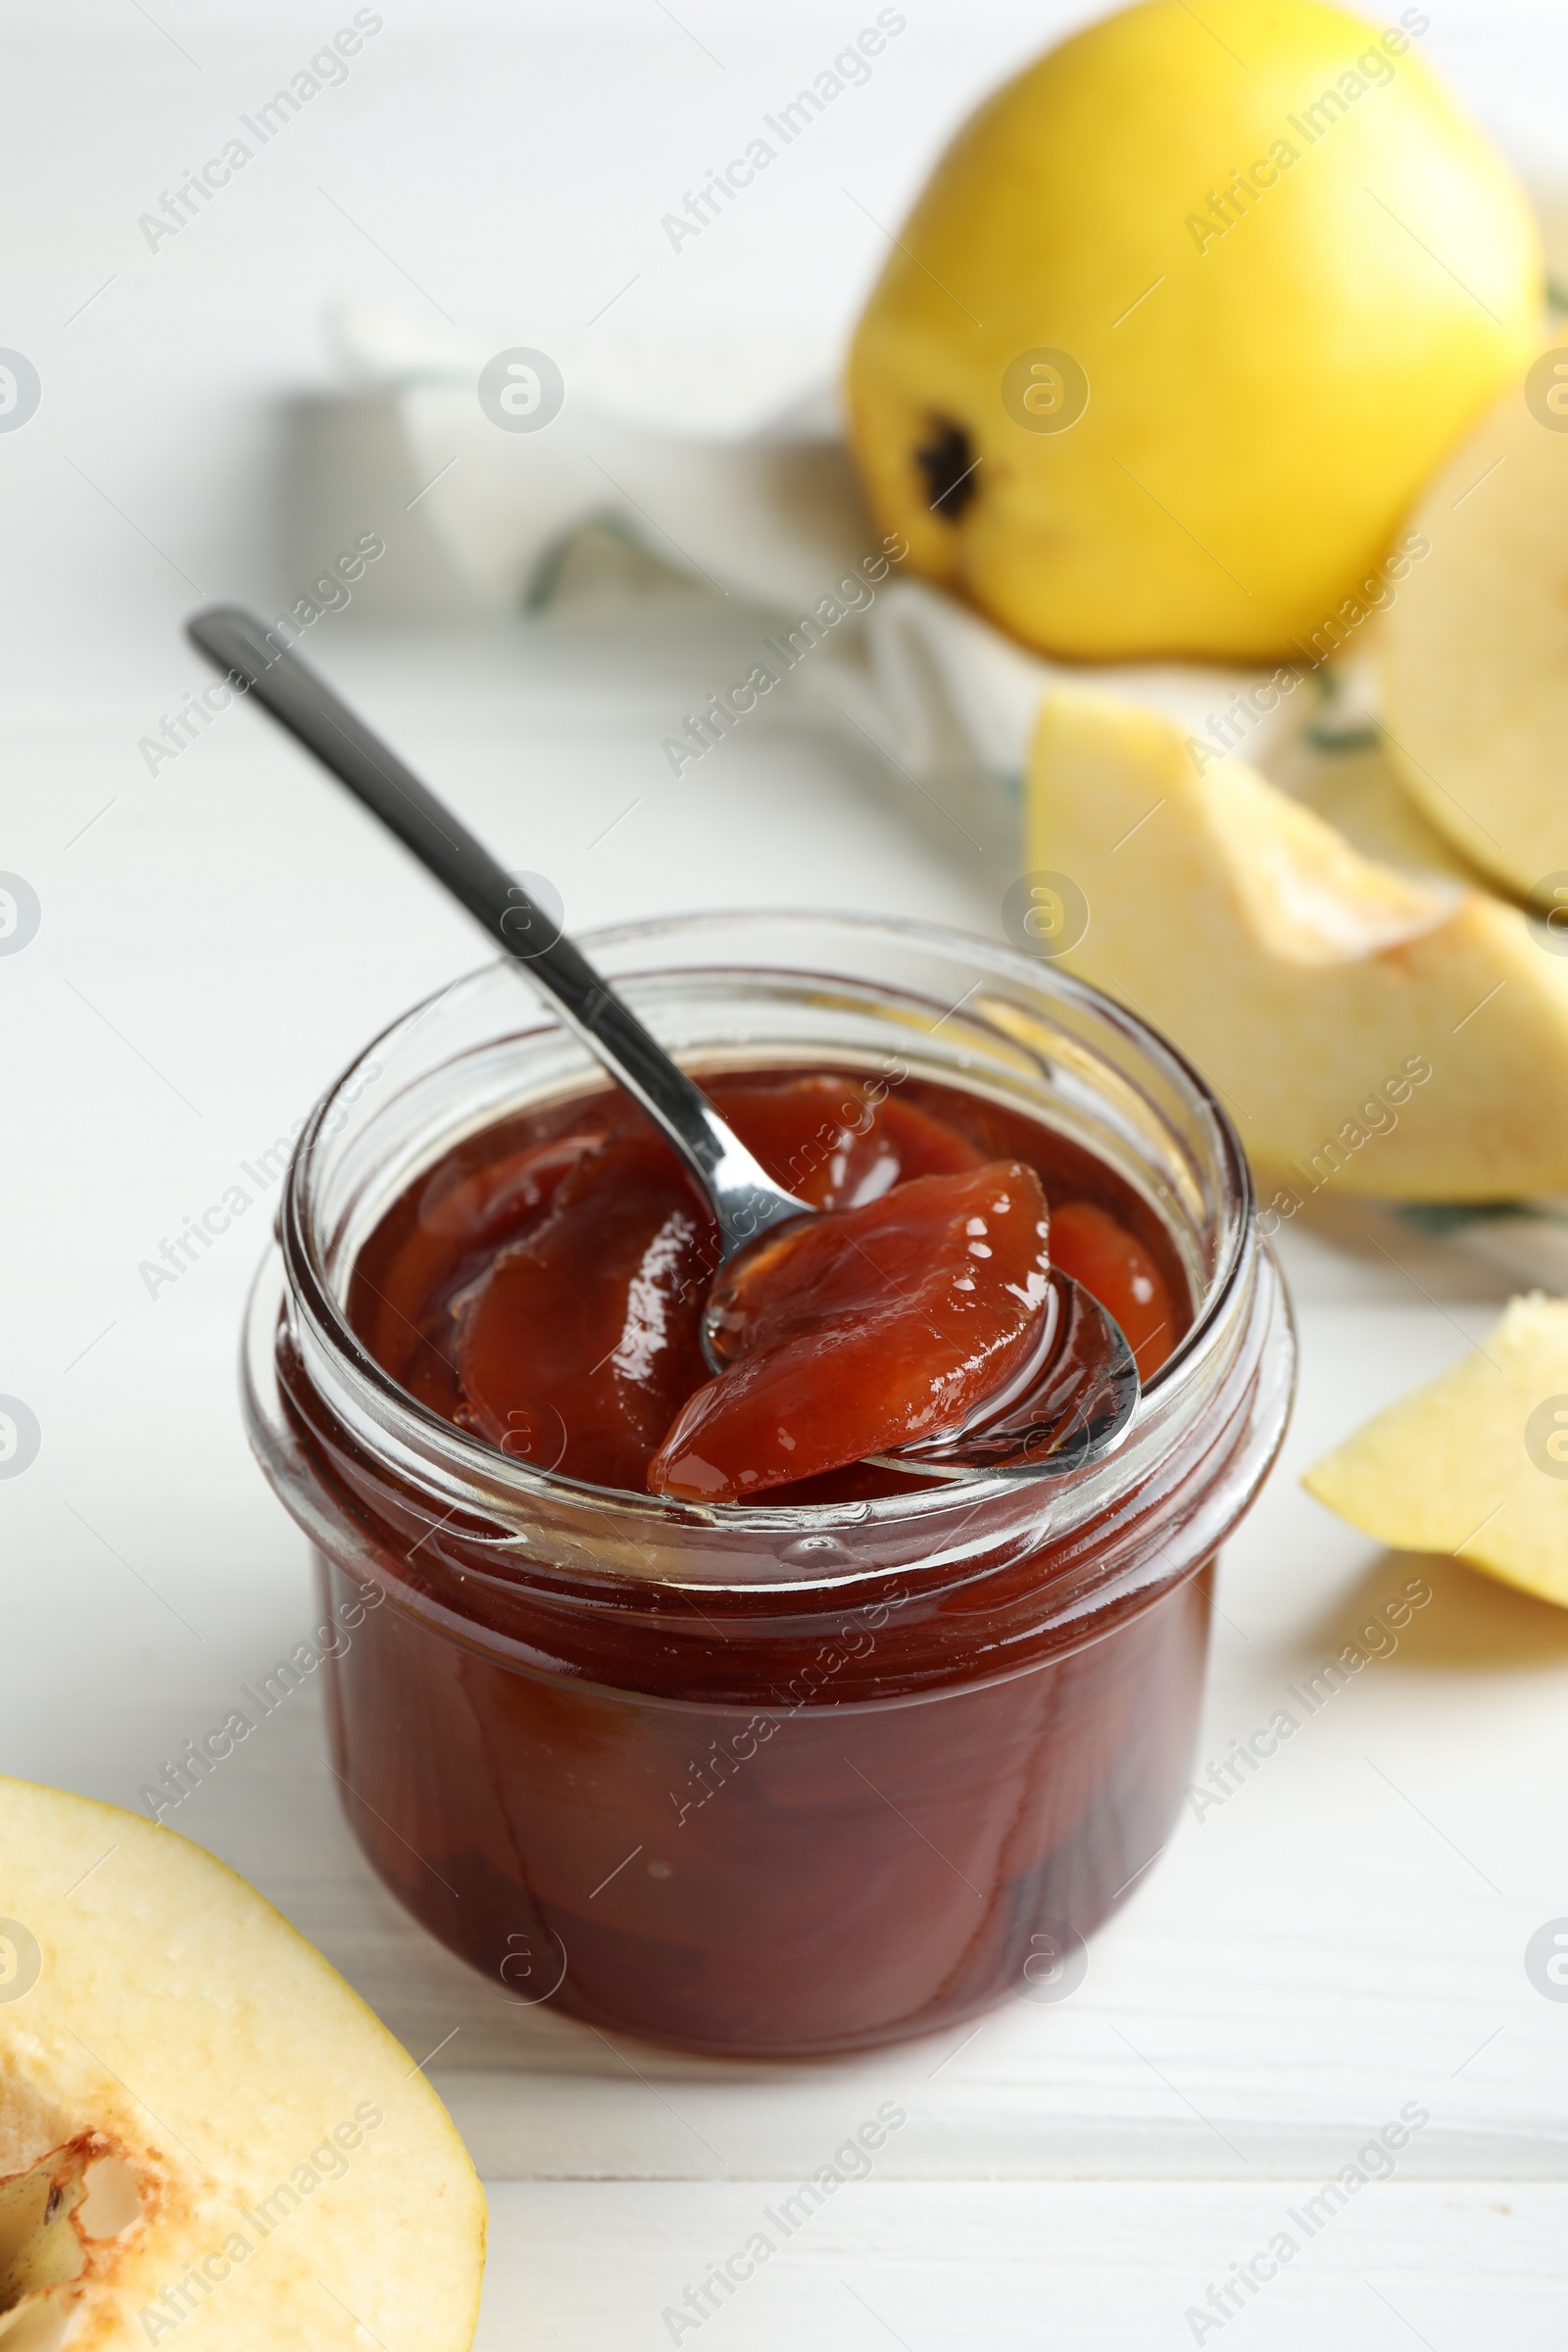 Photo of Tasty homemade quince jam in jar, spoon and fruits on white wooden table